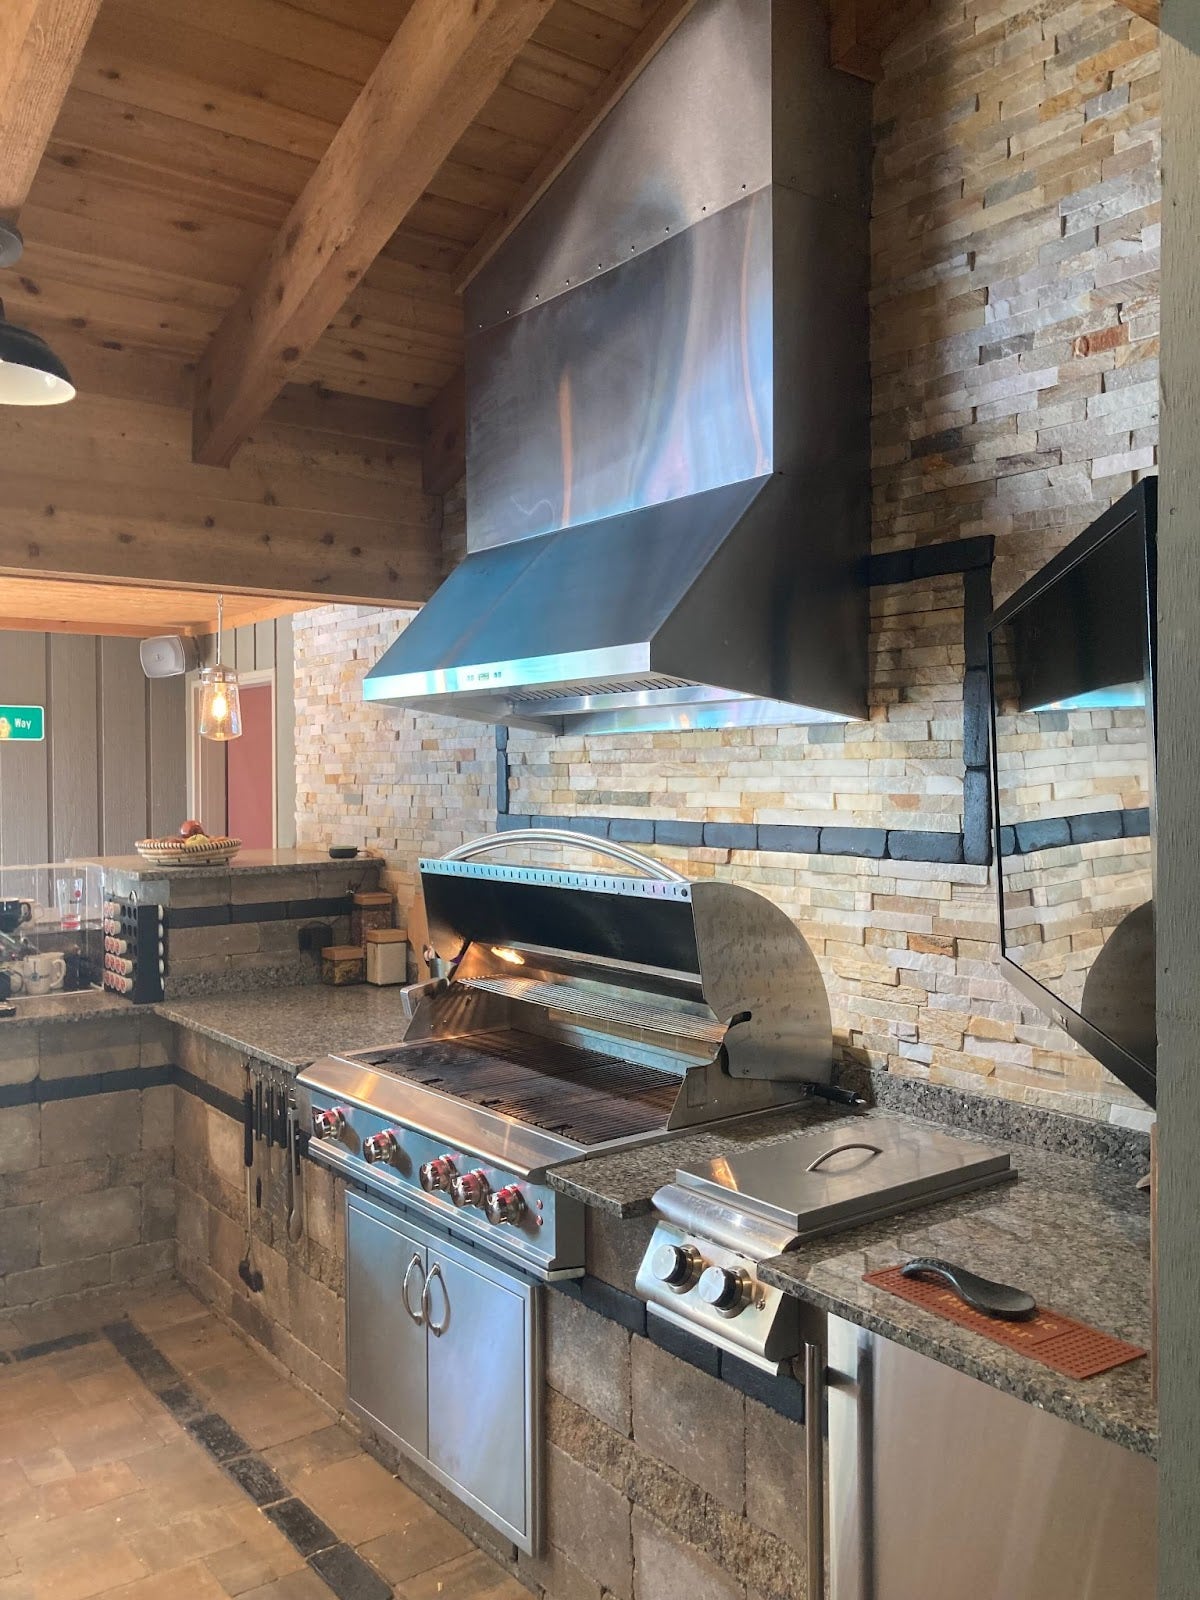 Gourmet indoor barbecue area with a high-end gas grill, prominent steel vent, granite countertops, and natural wood and stone finishes.  - Proline Range Hoods - prolinerangehoods.com 